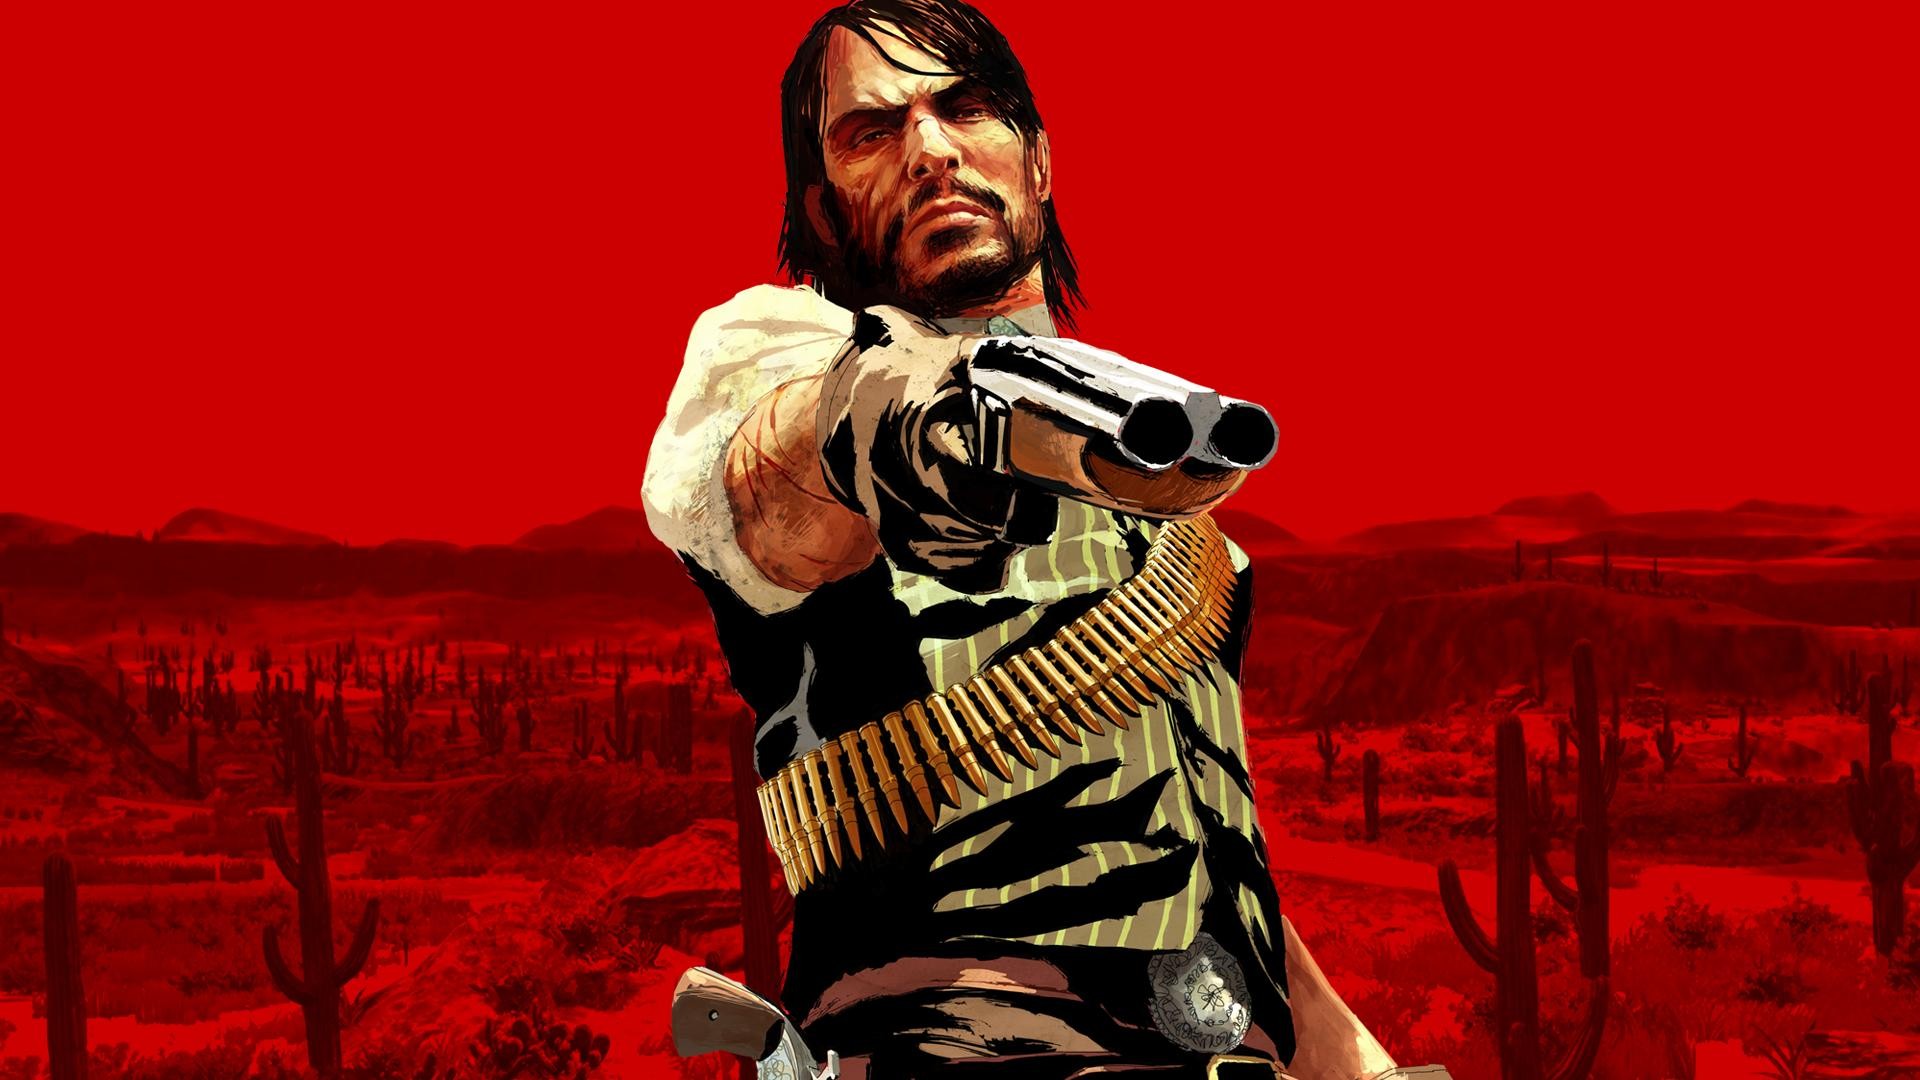 Red Dead Redemption 2010